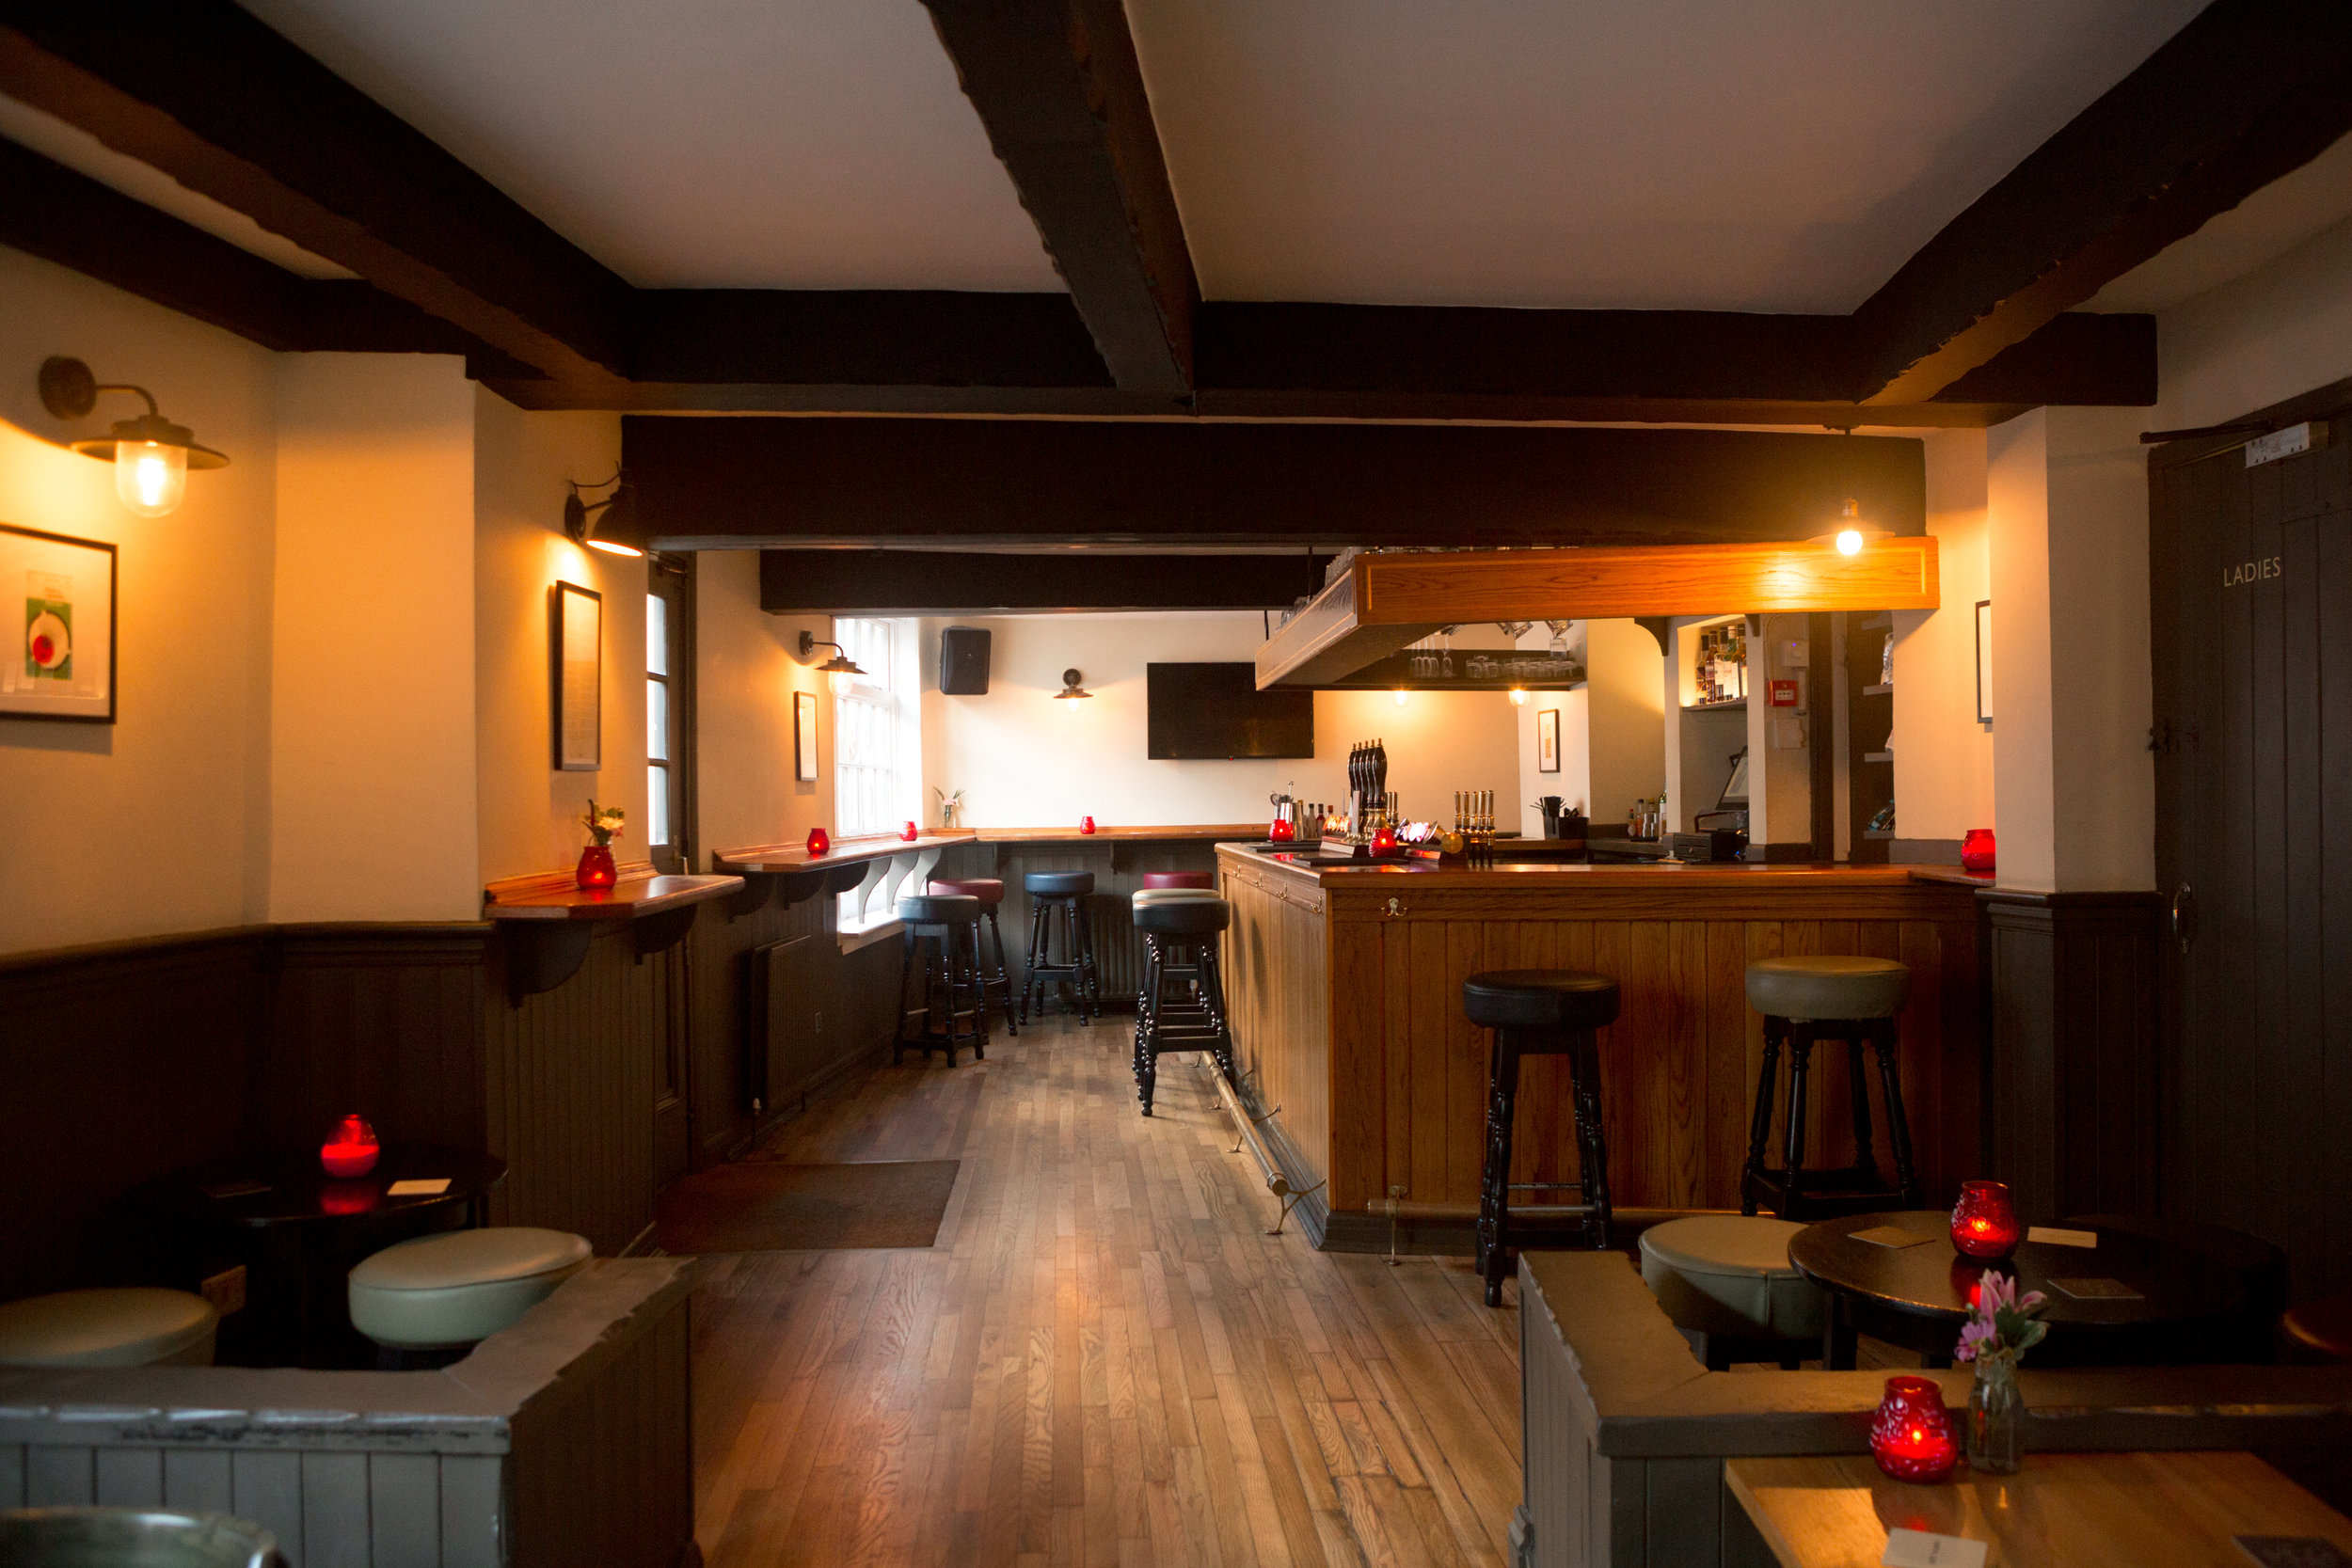 A wood-panelled pub interior, with the bar to the right in the background and tables and stools in front.